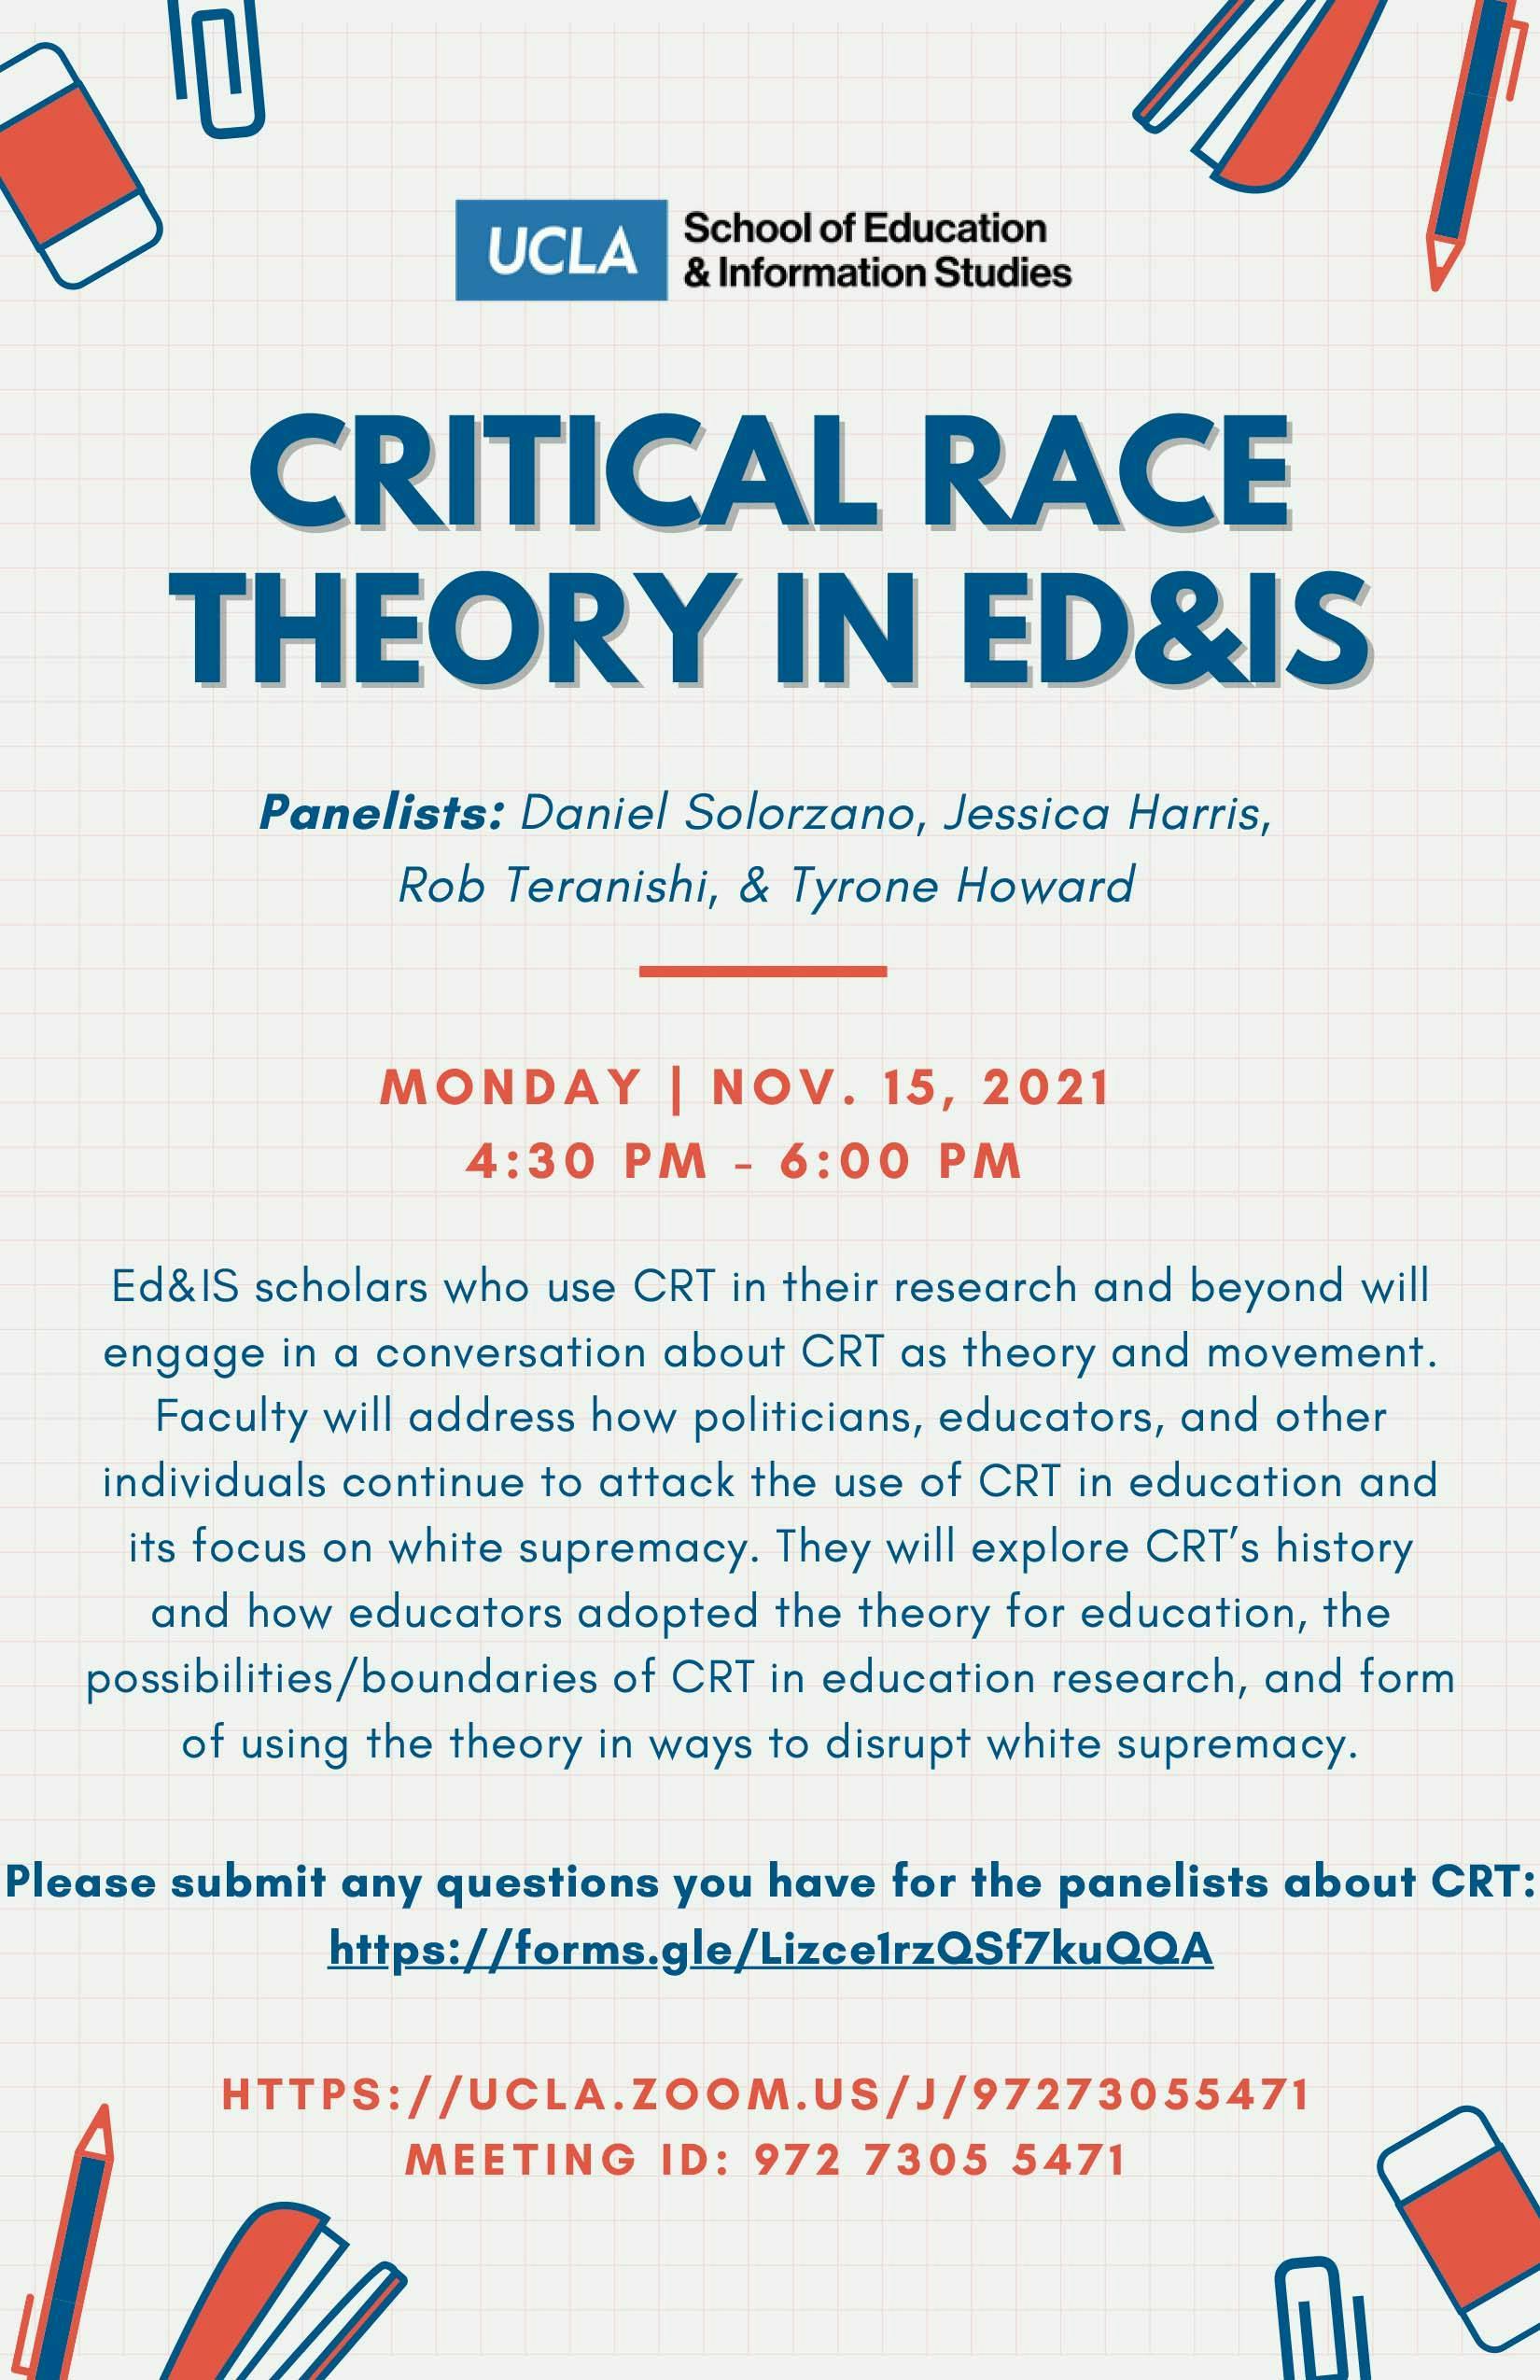 Critical Race Theory in Ed&IS Event Flyer